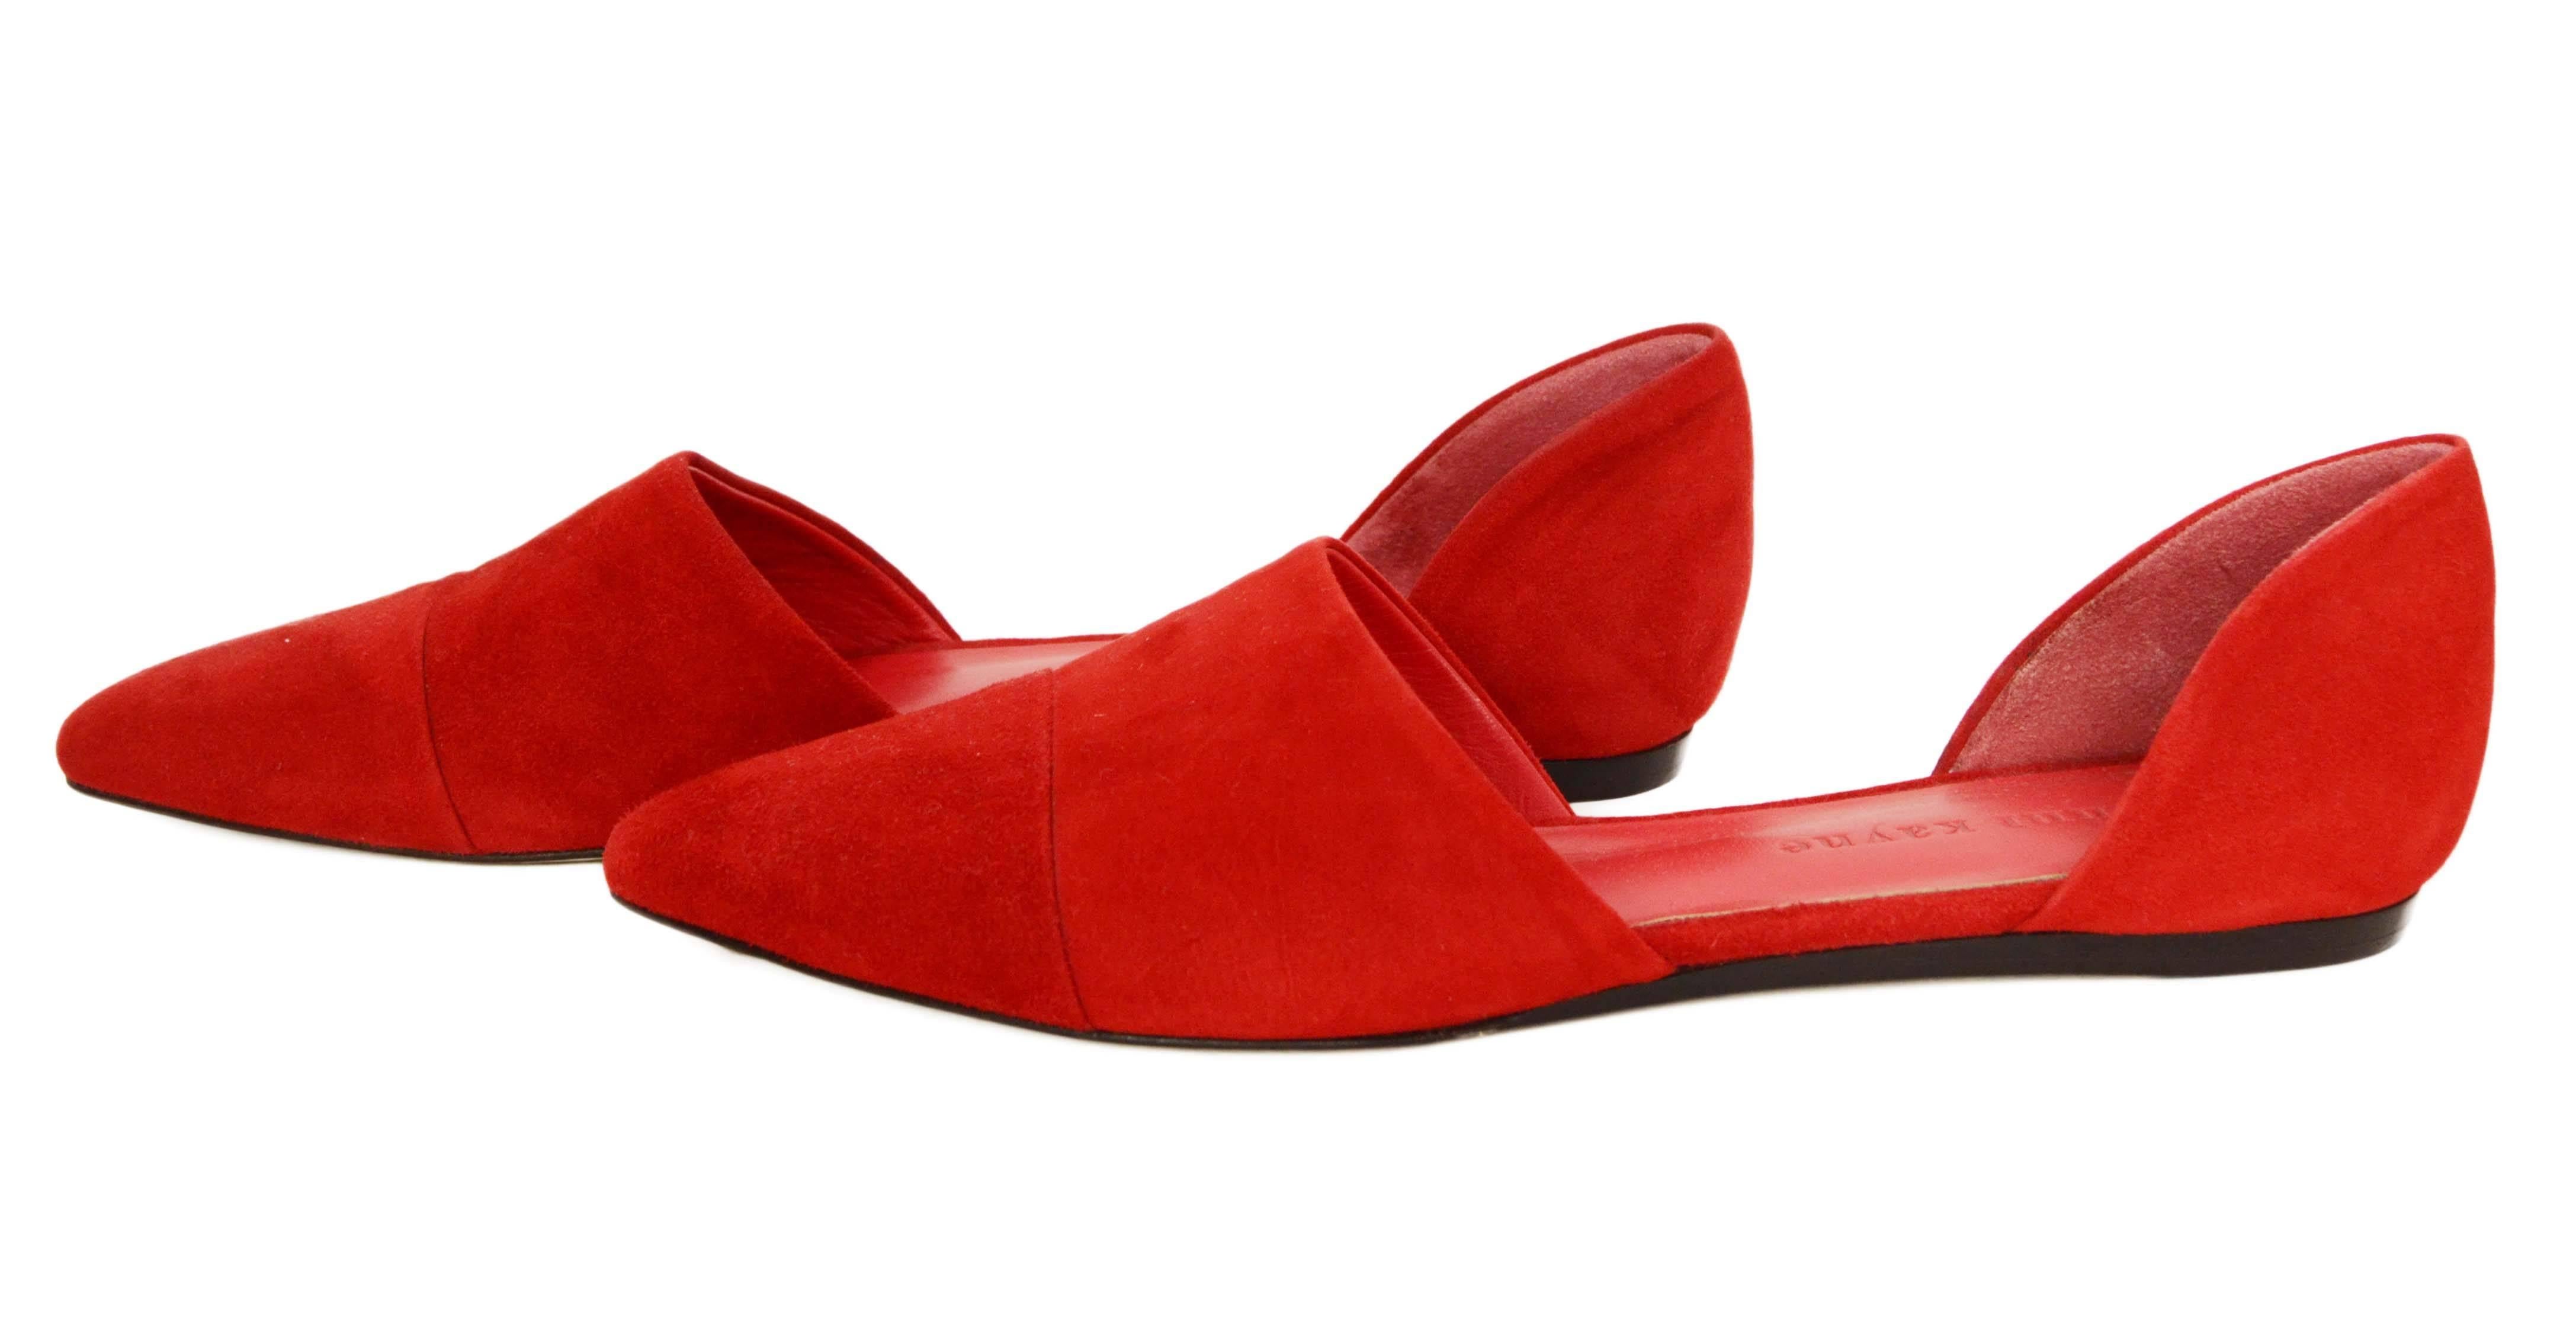 Jenni Kayne Red Suede D'Orsay Flats 
Features pointed toe
Made In: Italy
Color: Red
Materials: Suede
Closure/Opening: Slide on
Sole Stamp: Jenni Kayne Made in Italy Vero Cuoio 37
Retail Price: $450 + tax
Overall Condition: Excellent